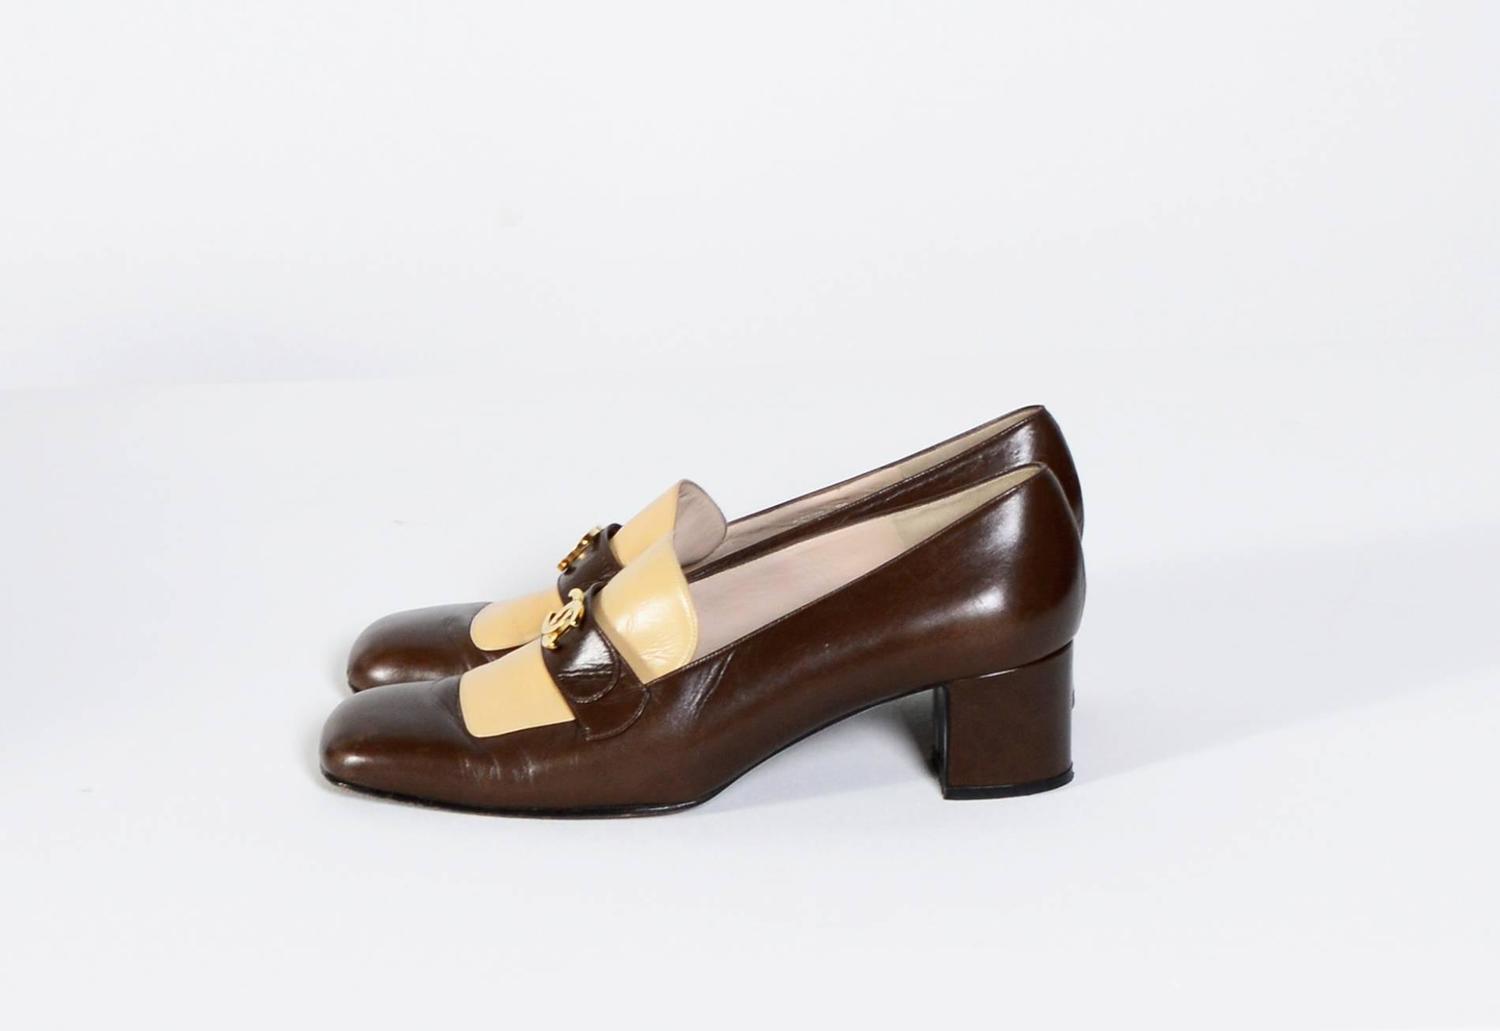 Vintage 60's CHANEL Shoes at 1stdibs